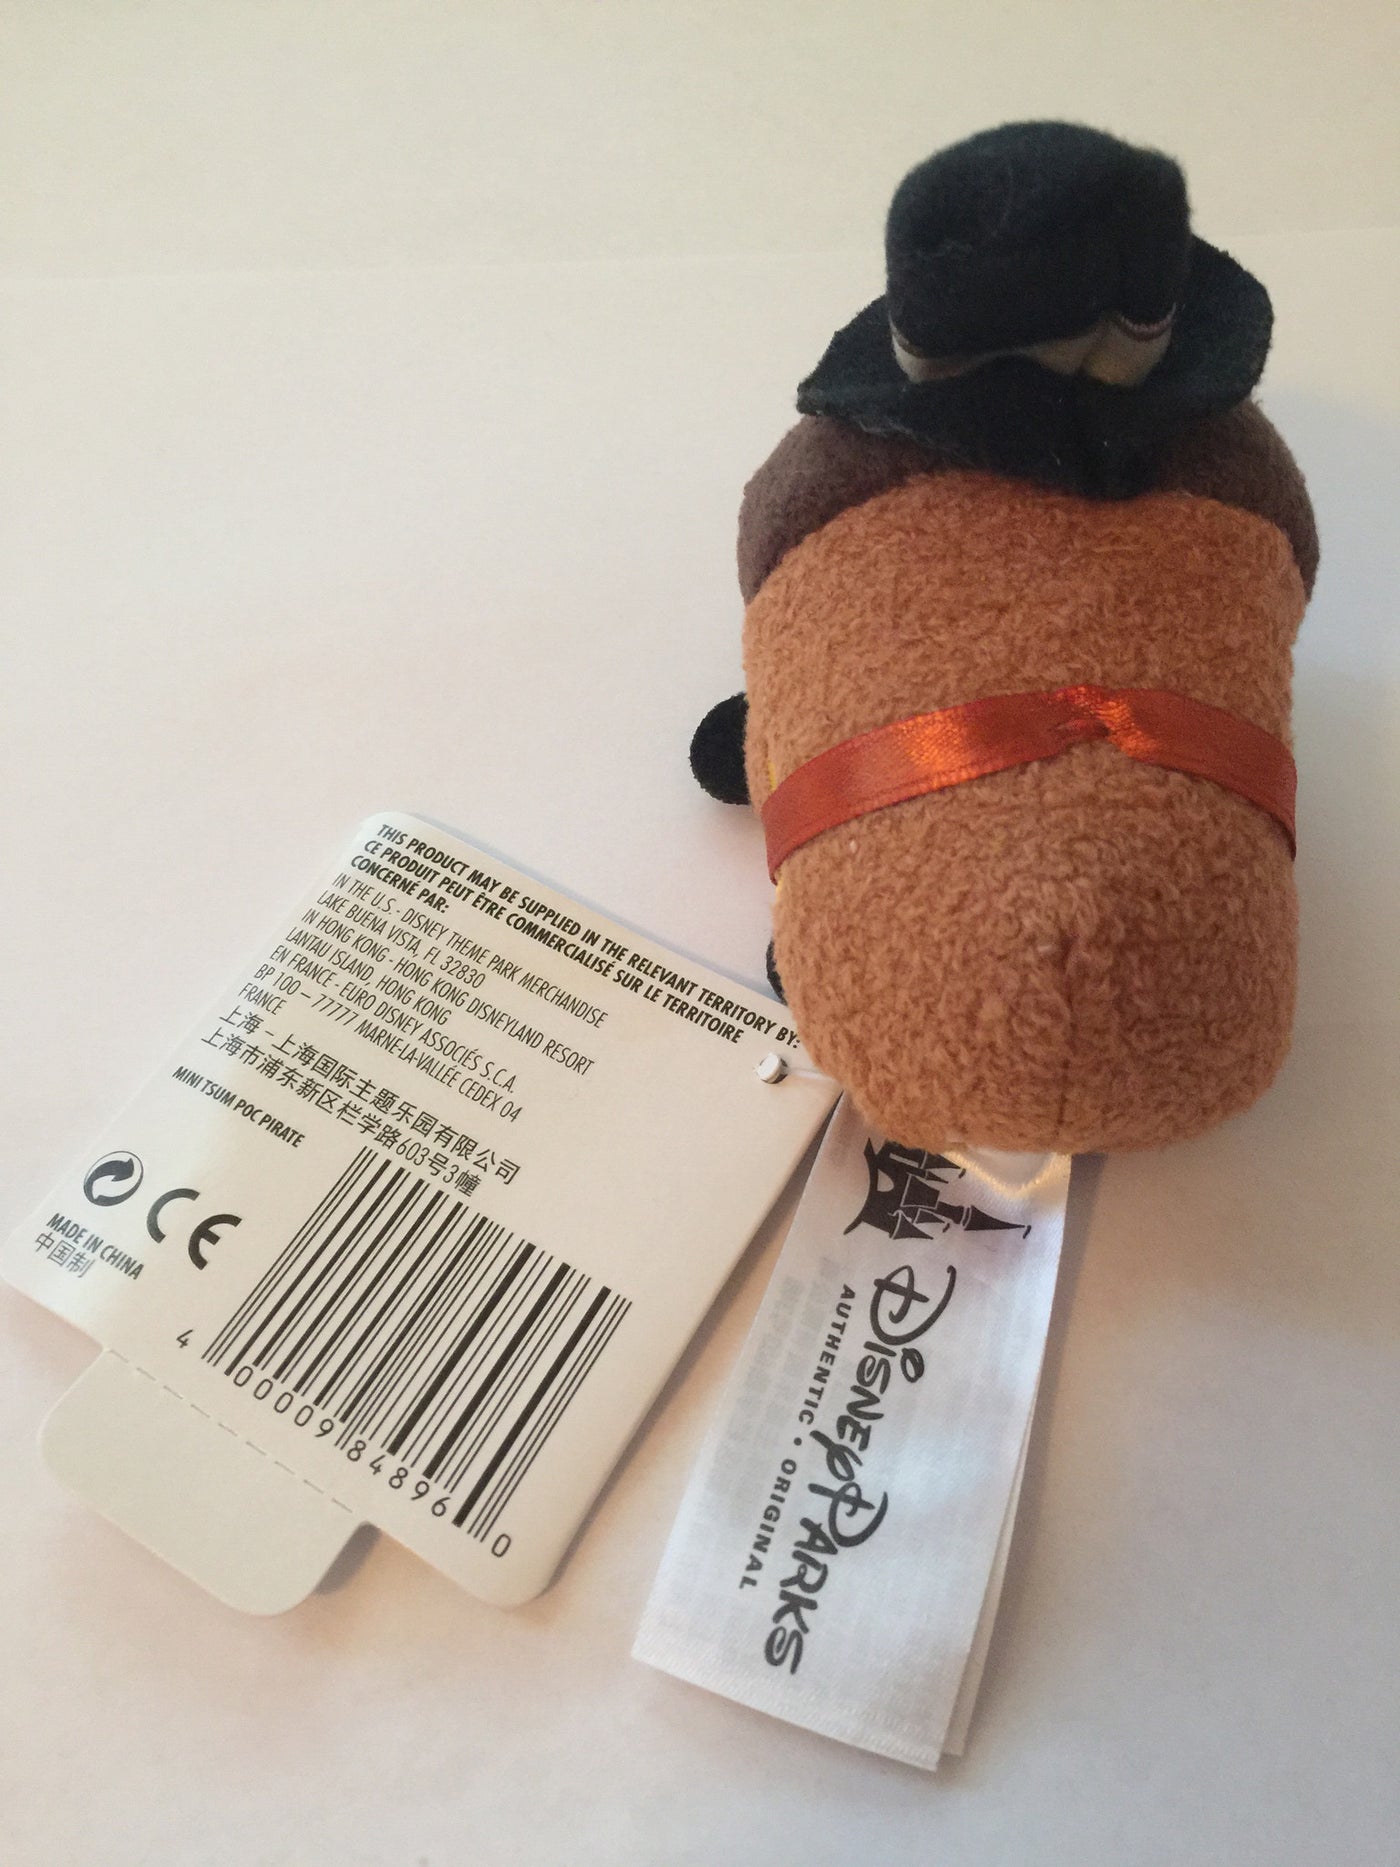 Disney Parks Tsum Tsum Pirates of the Caribbean Captain Jack Sparrow Plush New with Tags